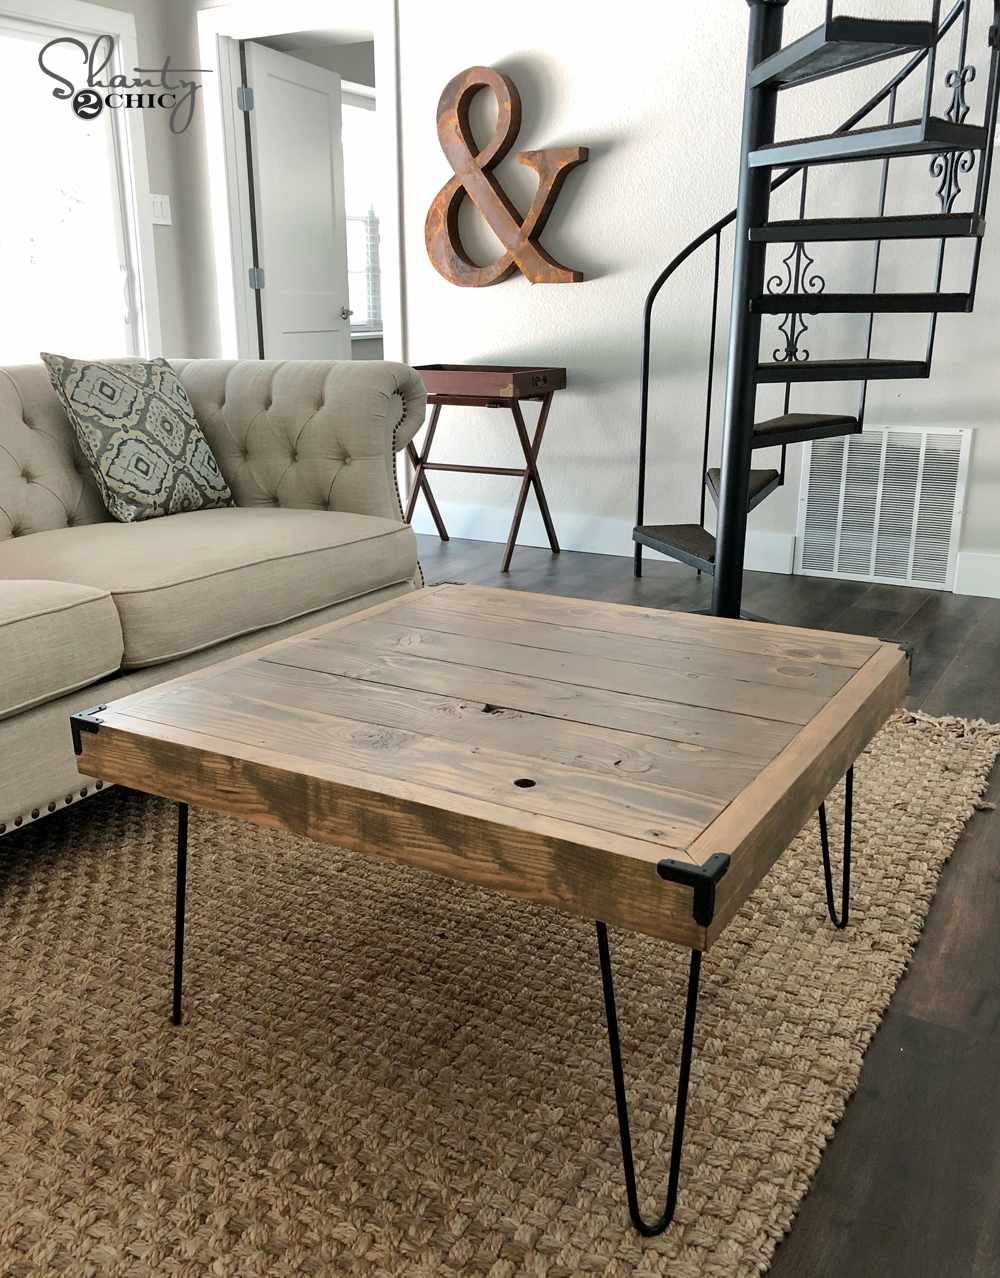 Coffee table with a rustic design